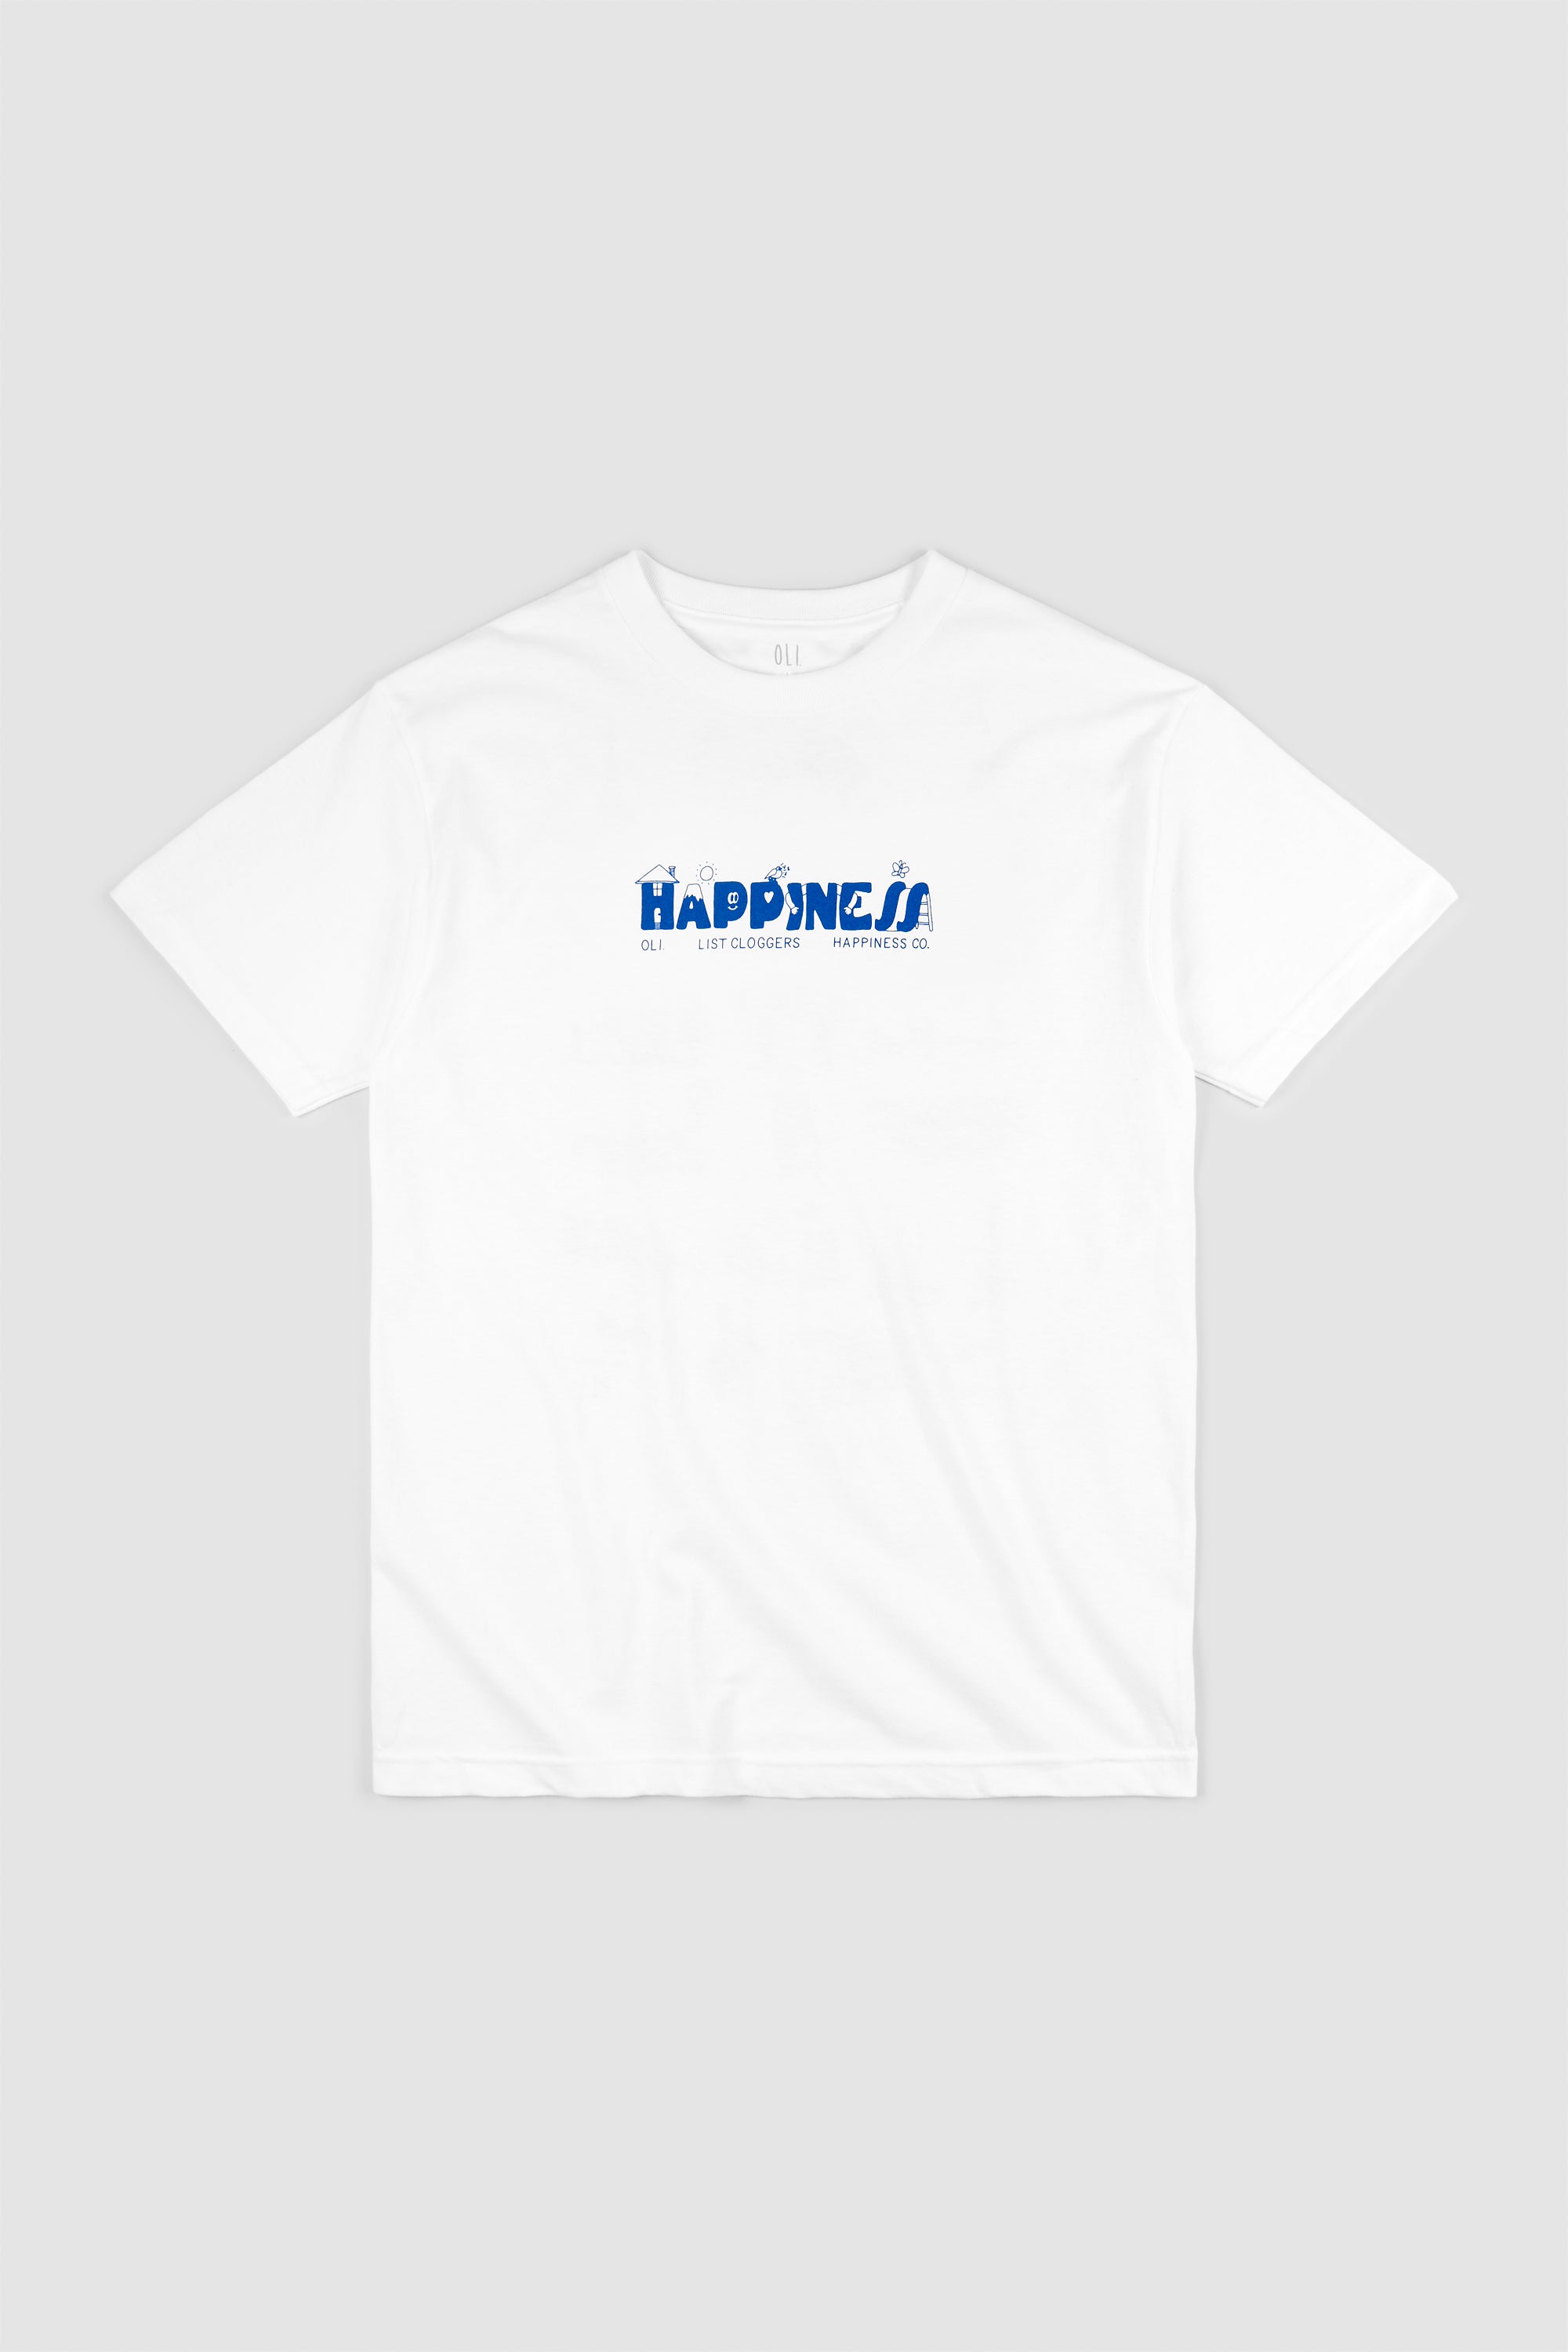 Happiness Fundraiser T - White